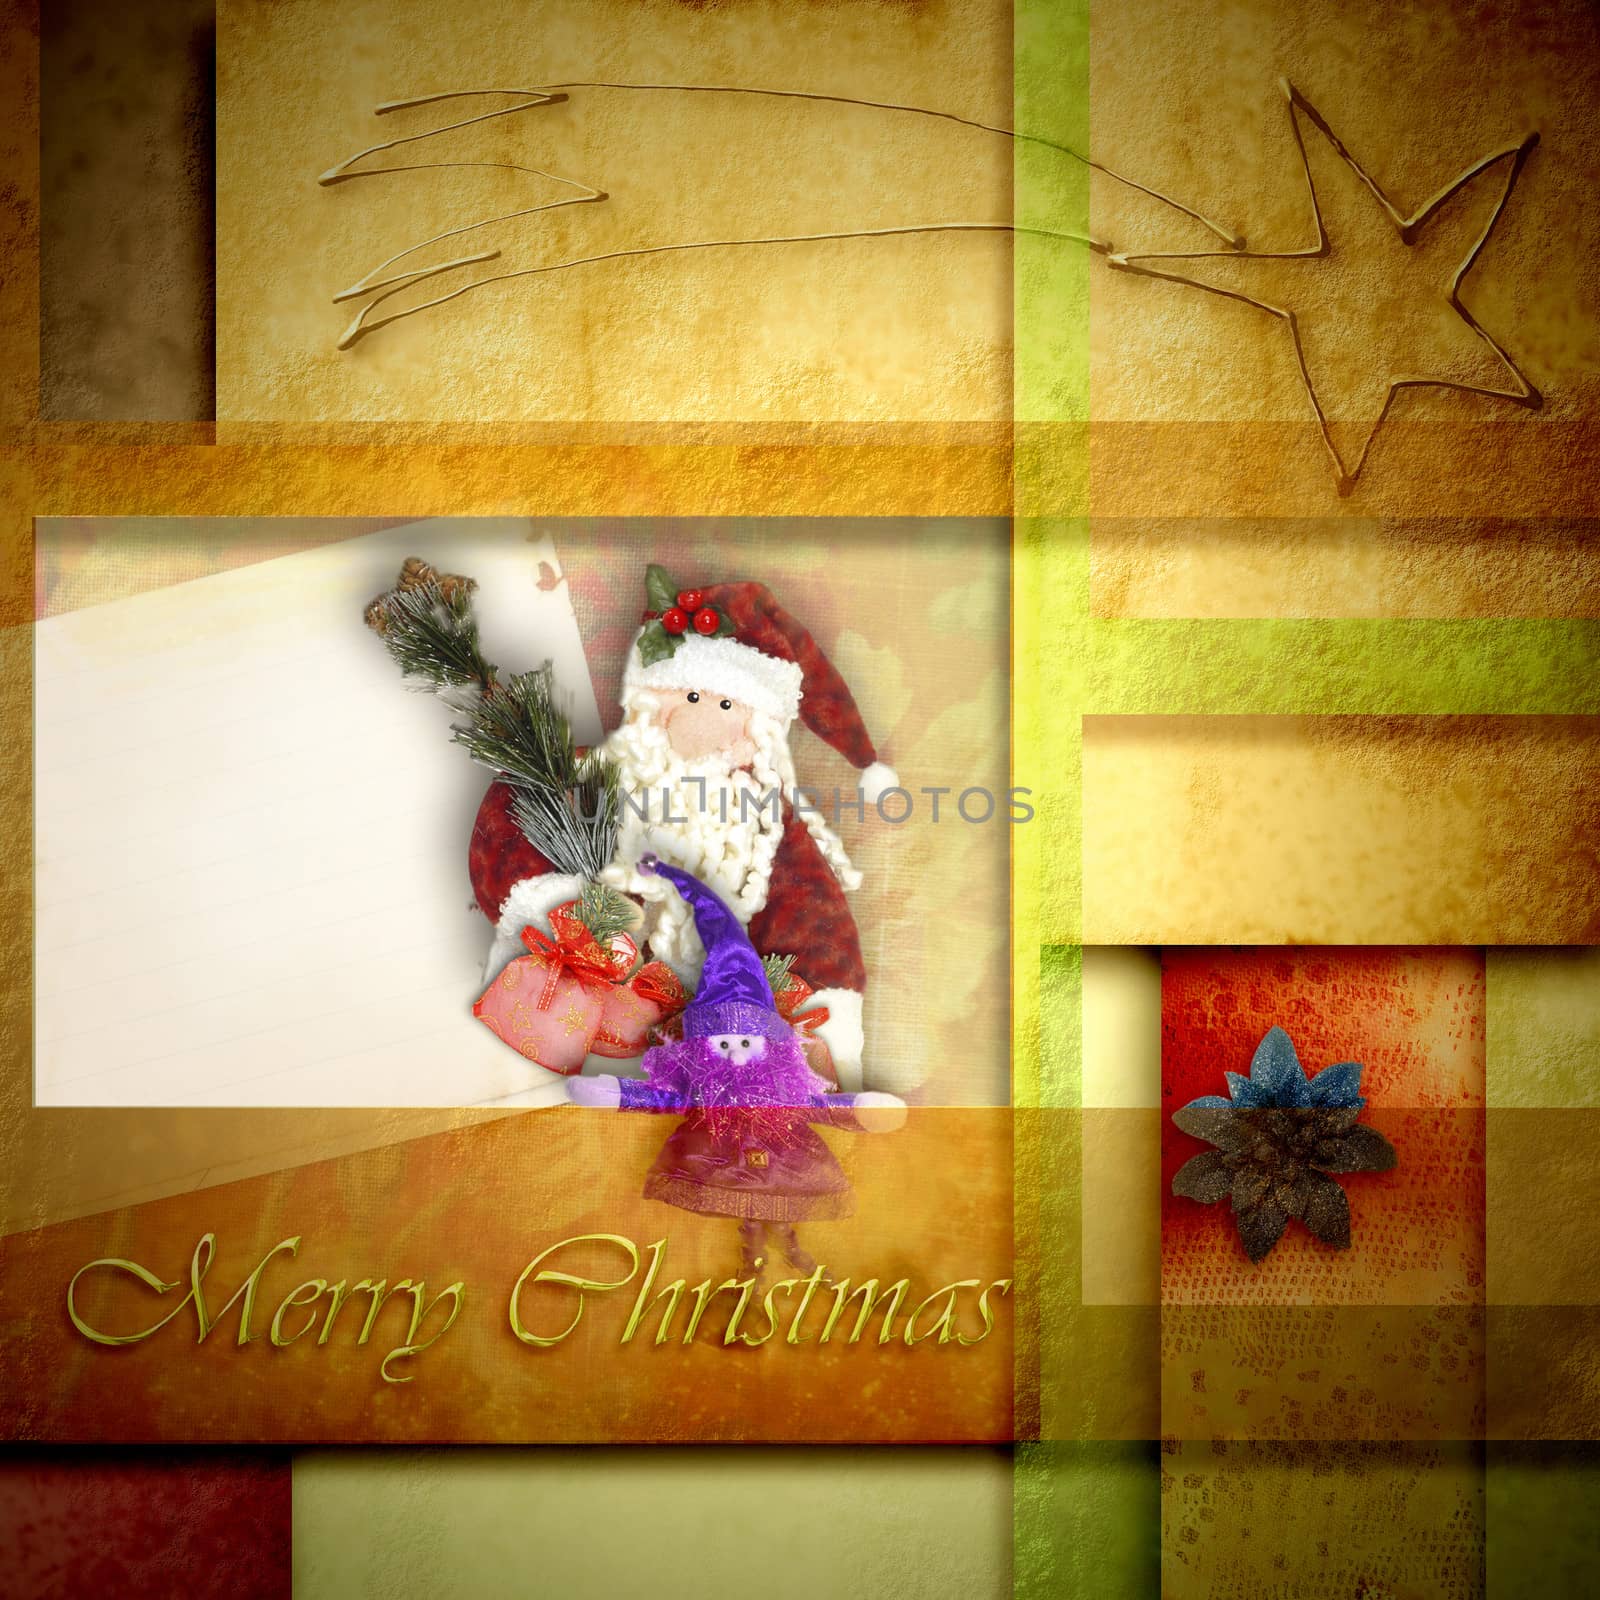 Christmas greeting cards Santa by Carche